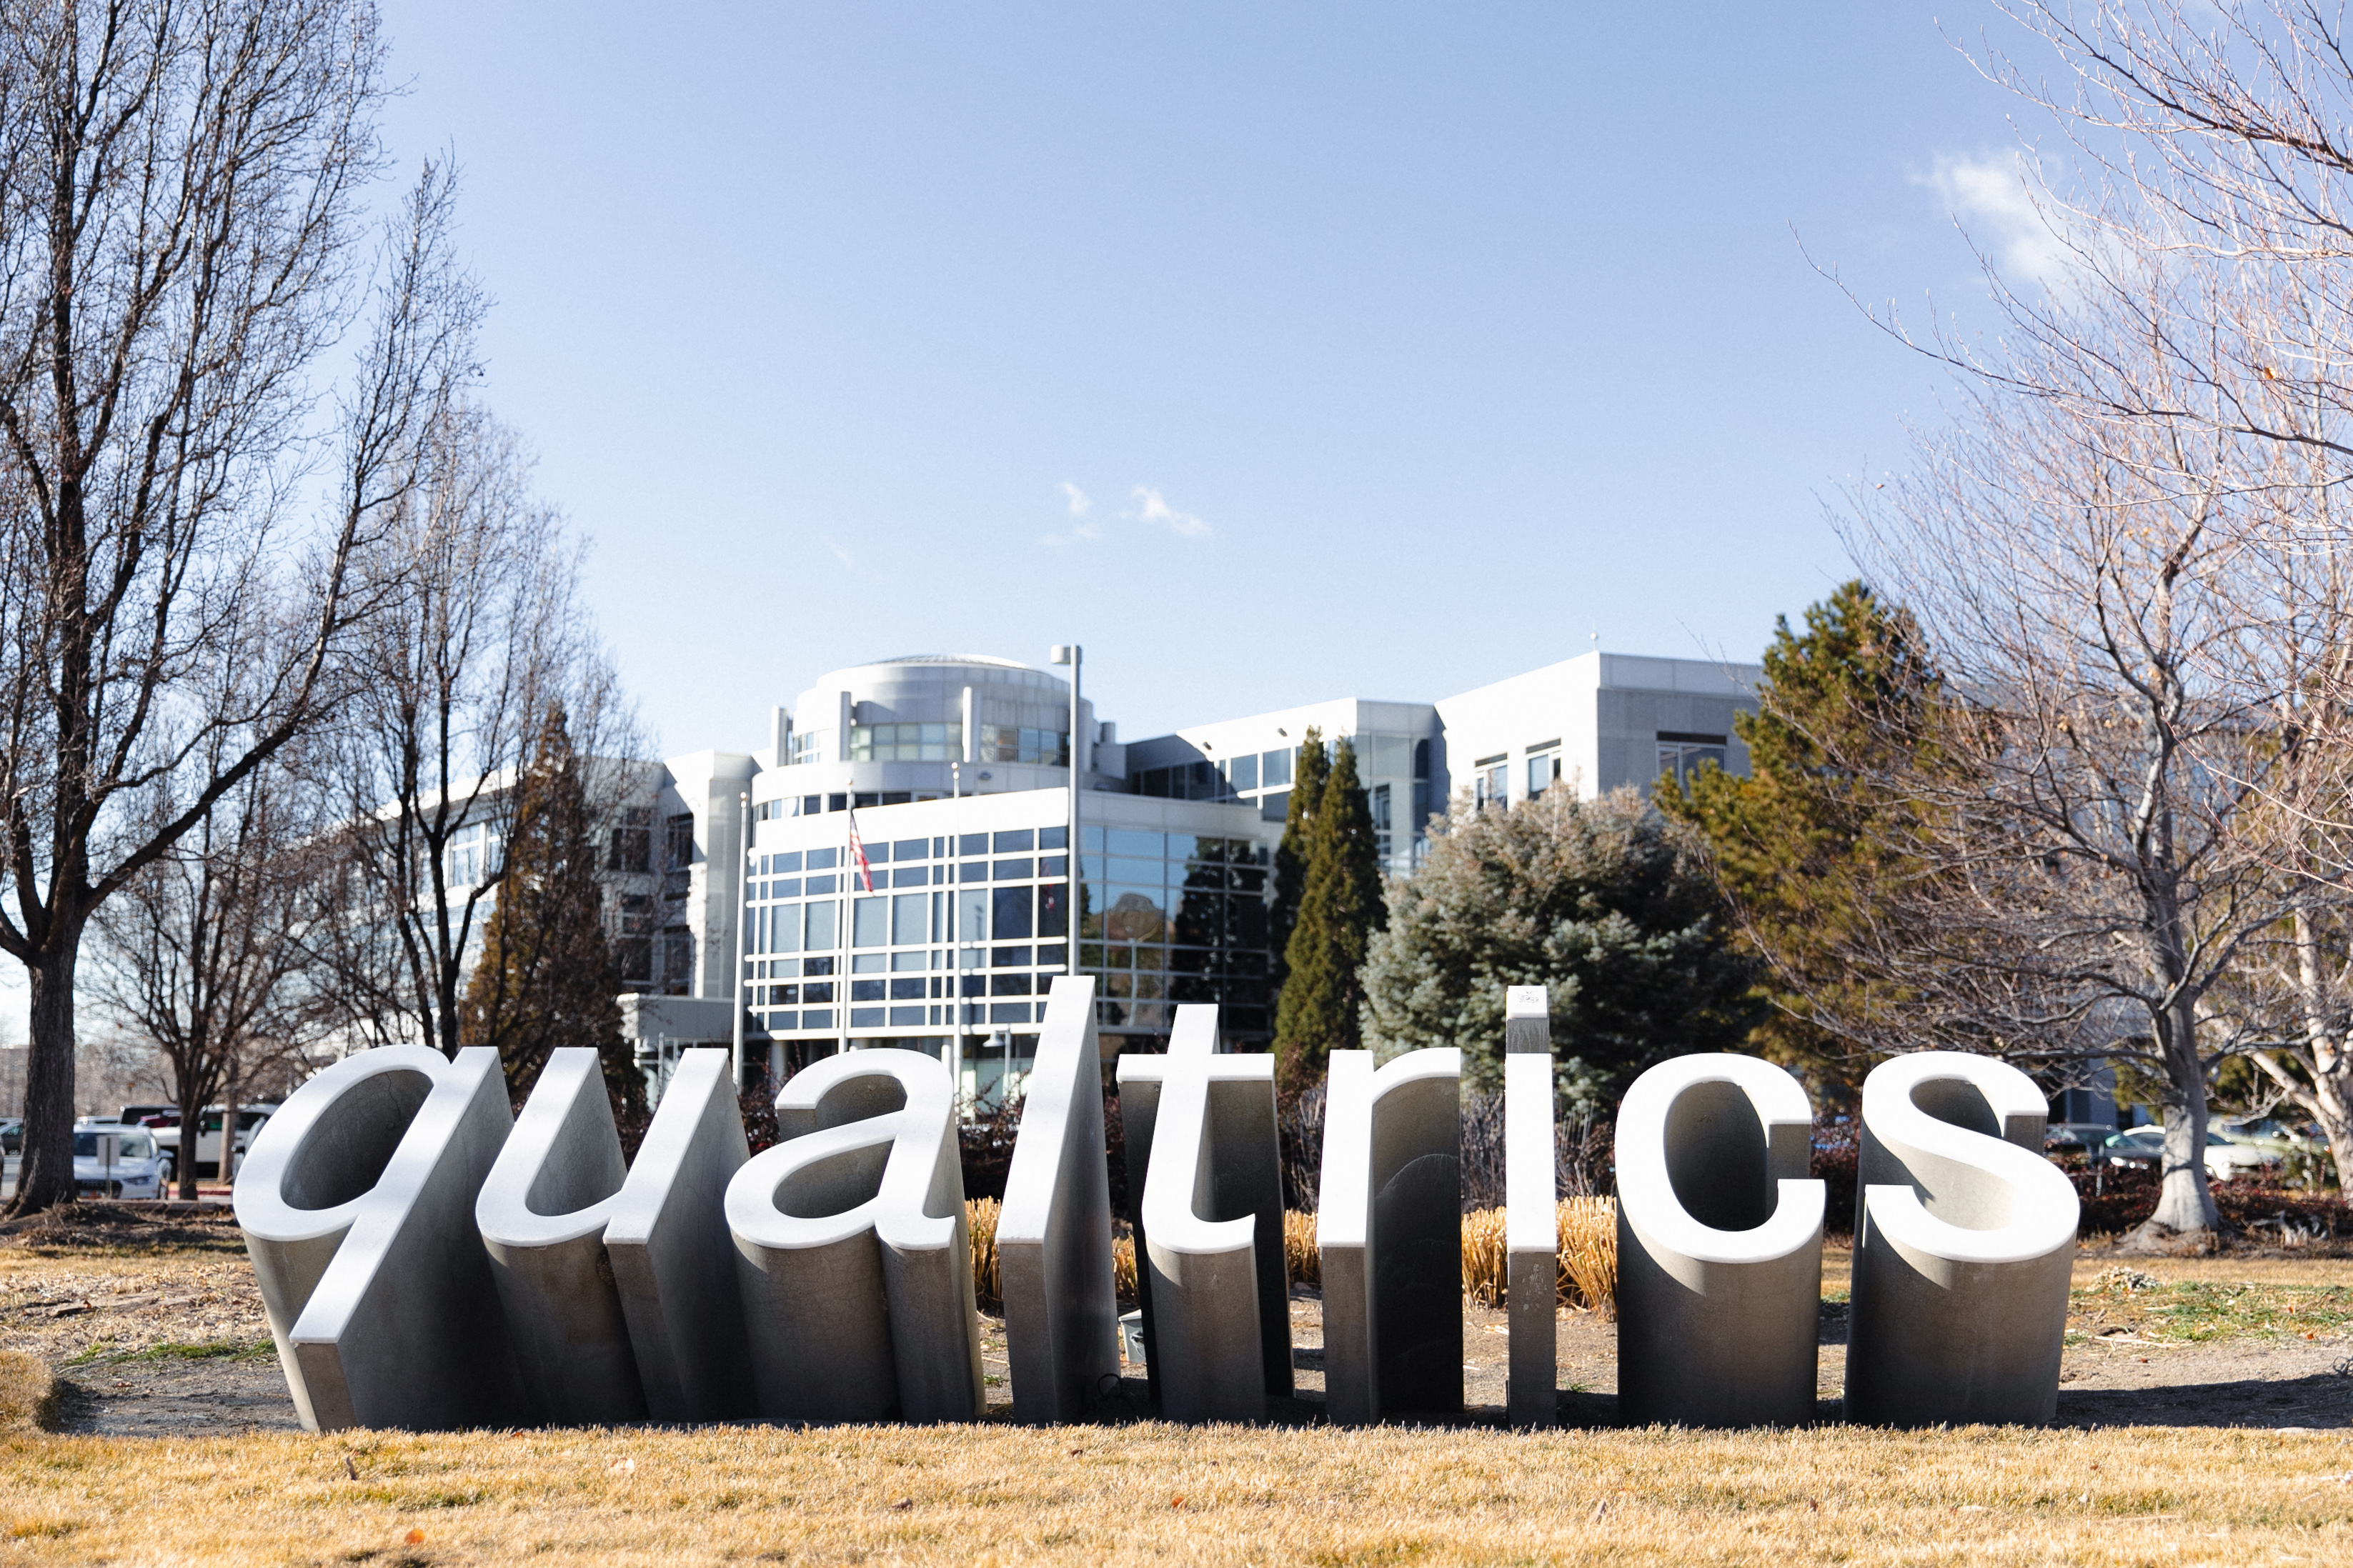 How one Utah family built Qualtrics, a tech startup they sold for